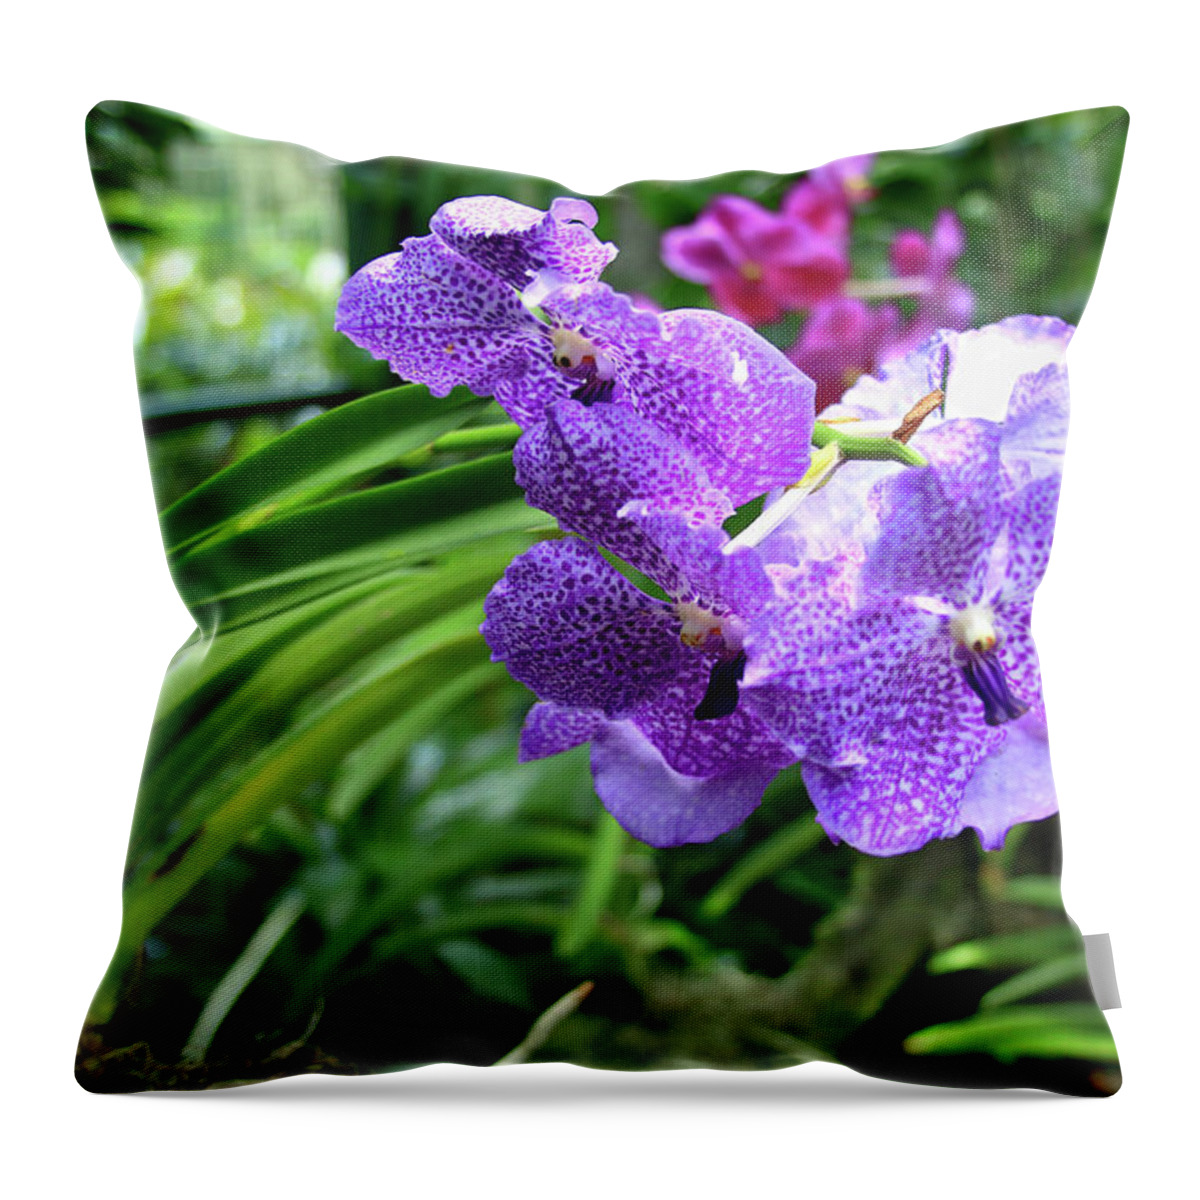 Ascocenda Throw Pillow featuring the photograph Princess Mikasa Blue Orchid by Tanya Owens